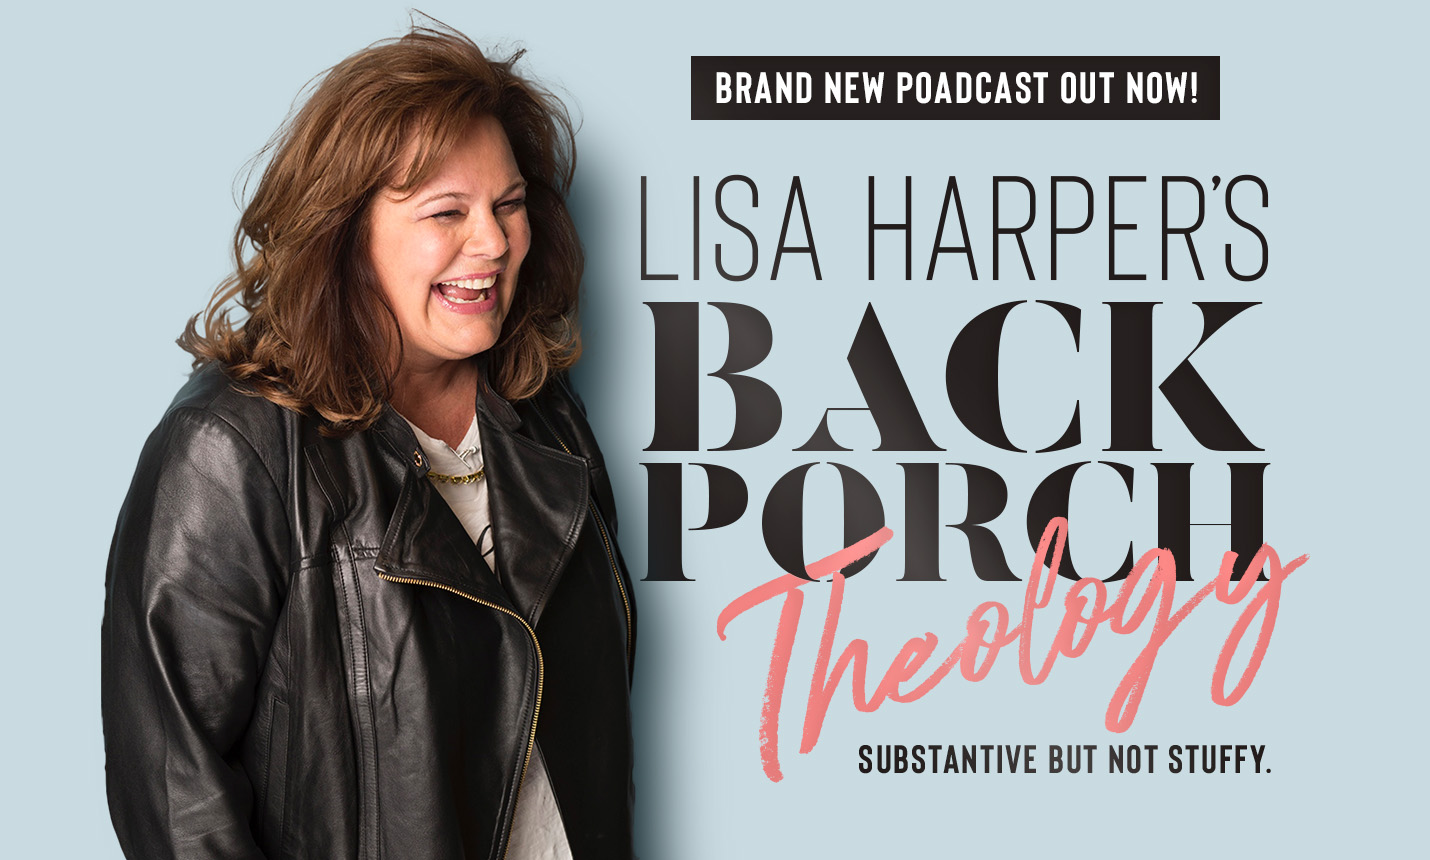 Lisa Harper's Back Porch Theology - Brand New Out Now